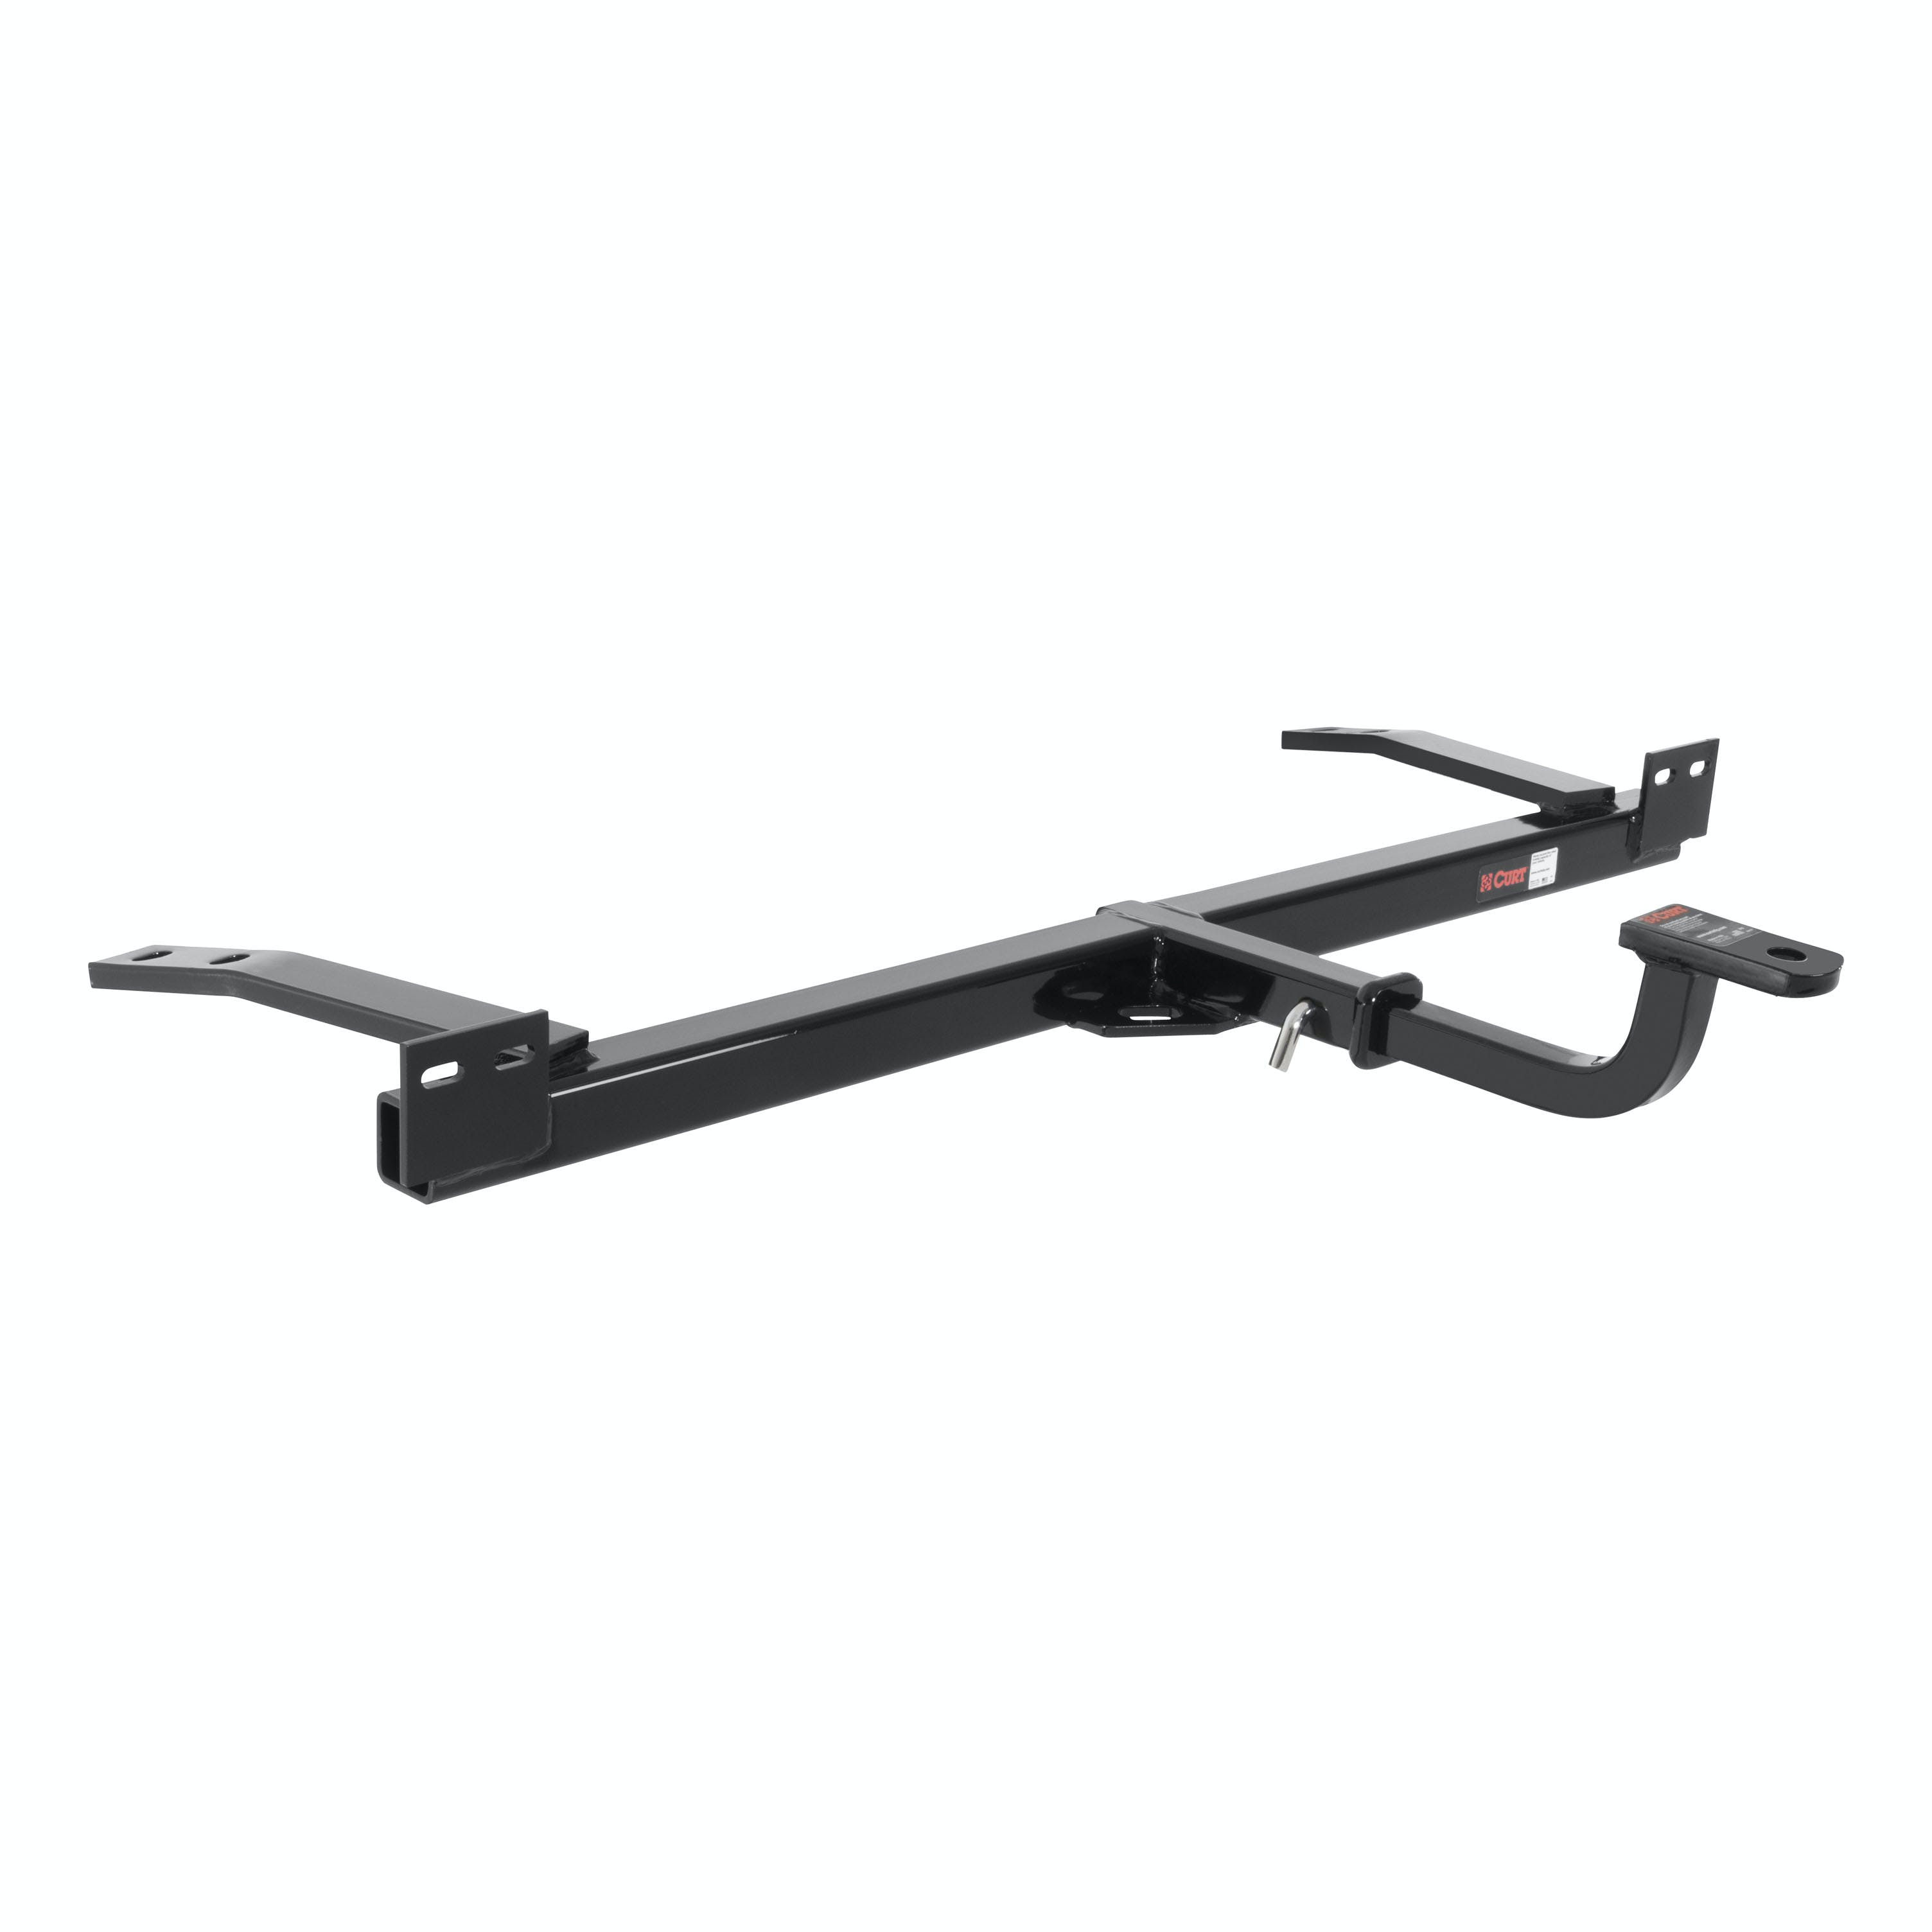 CURT 120093 Class 2 Hitch, 1-1/4 Mount, Select Buick, Chevy, Oldsmobile, Pontiac (Exposed)